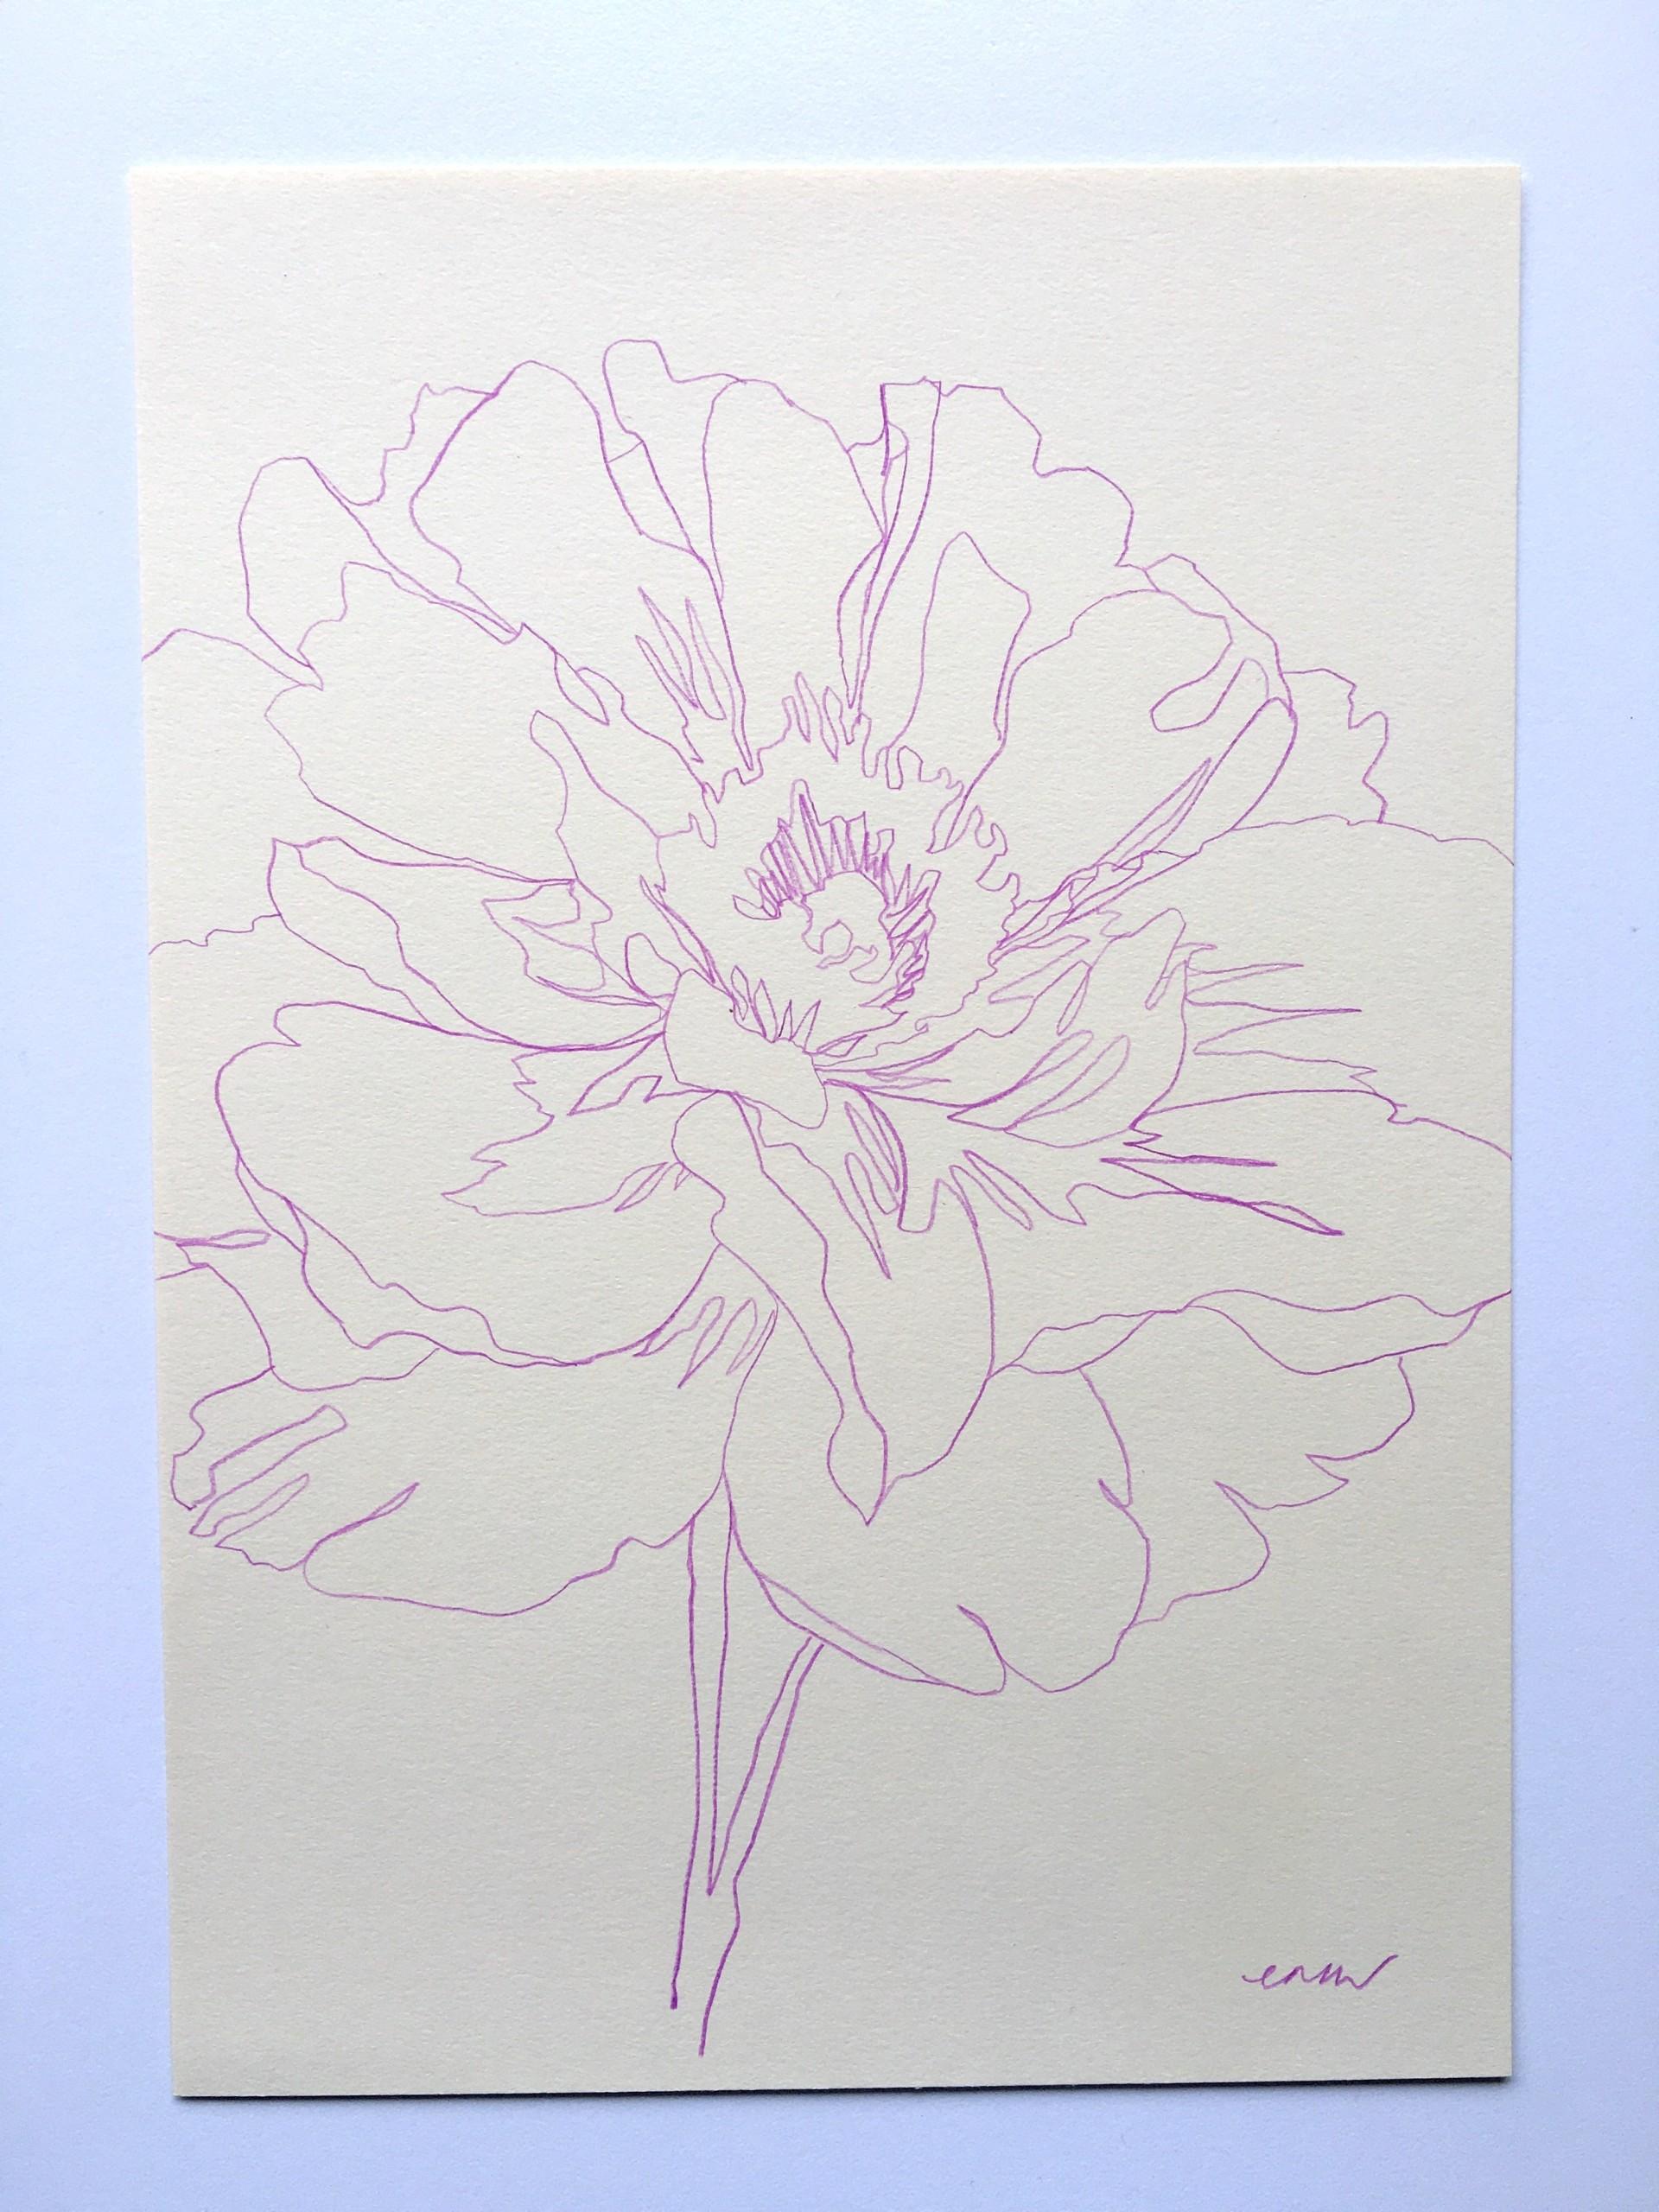 This drawing is one in a series of botanical line drawings depicting the seasonal flowers of English gardens and the countryside.
Ellen Mae Williams, artist, is available for sale online and in our art gallery at Wychwood Art. Ellen Mae Williams is